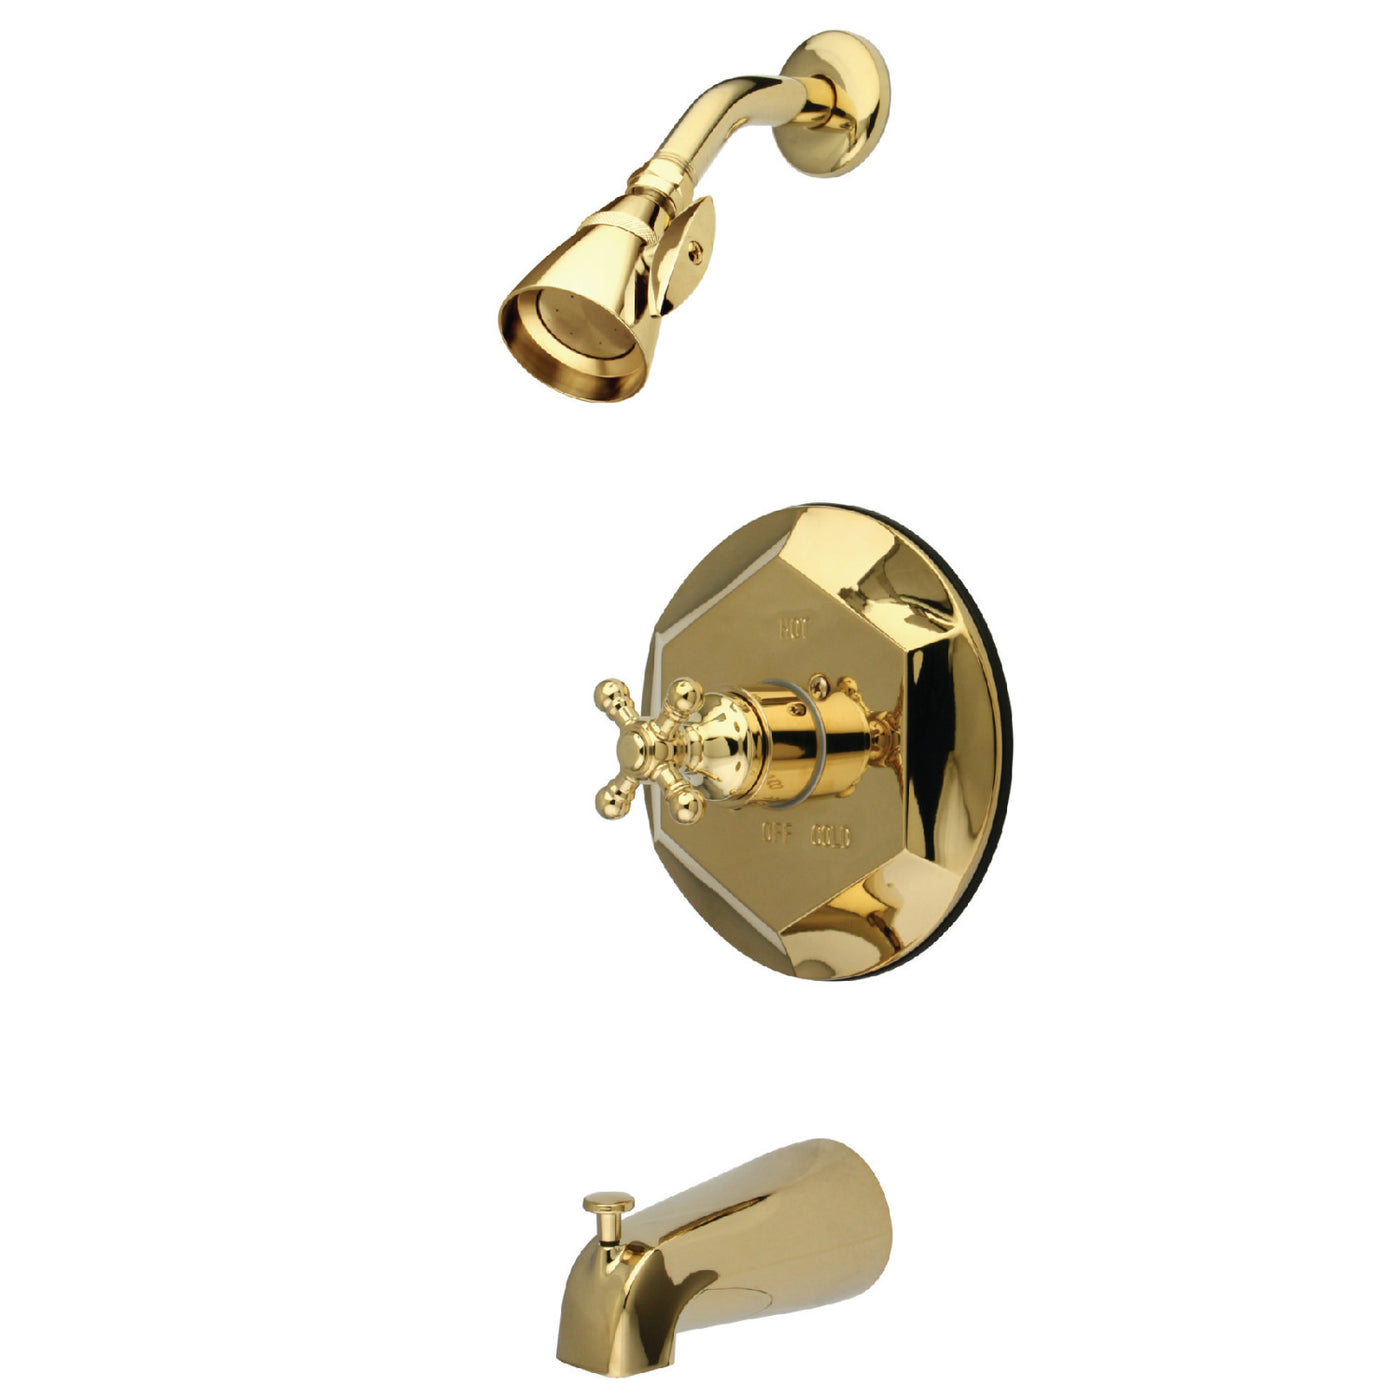 Elements of Design EB4632BX Tub and Shower Faucet, Polished Brass